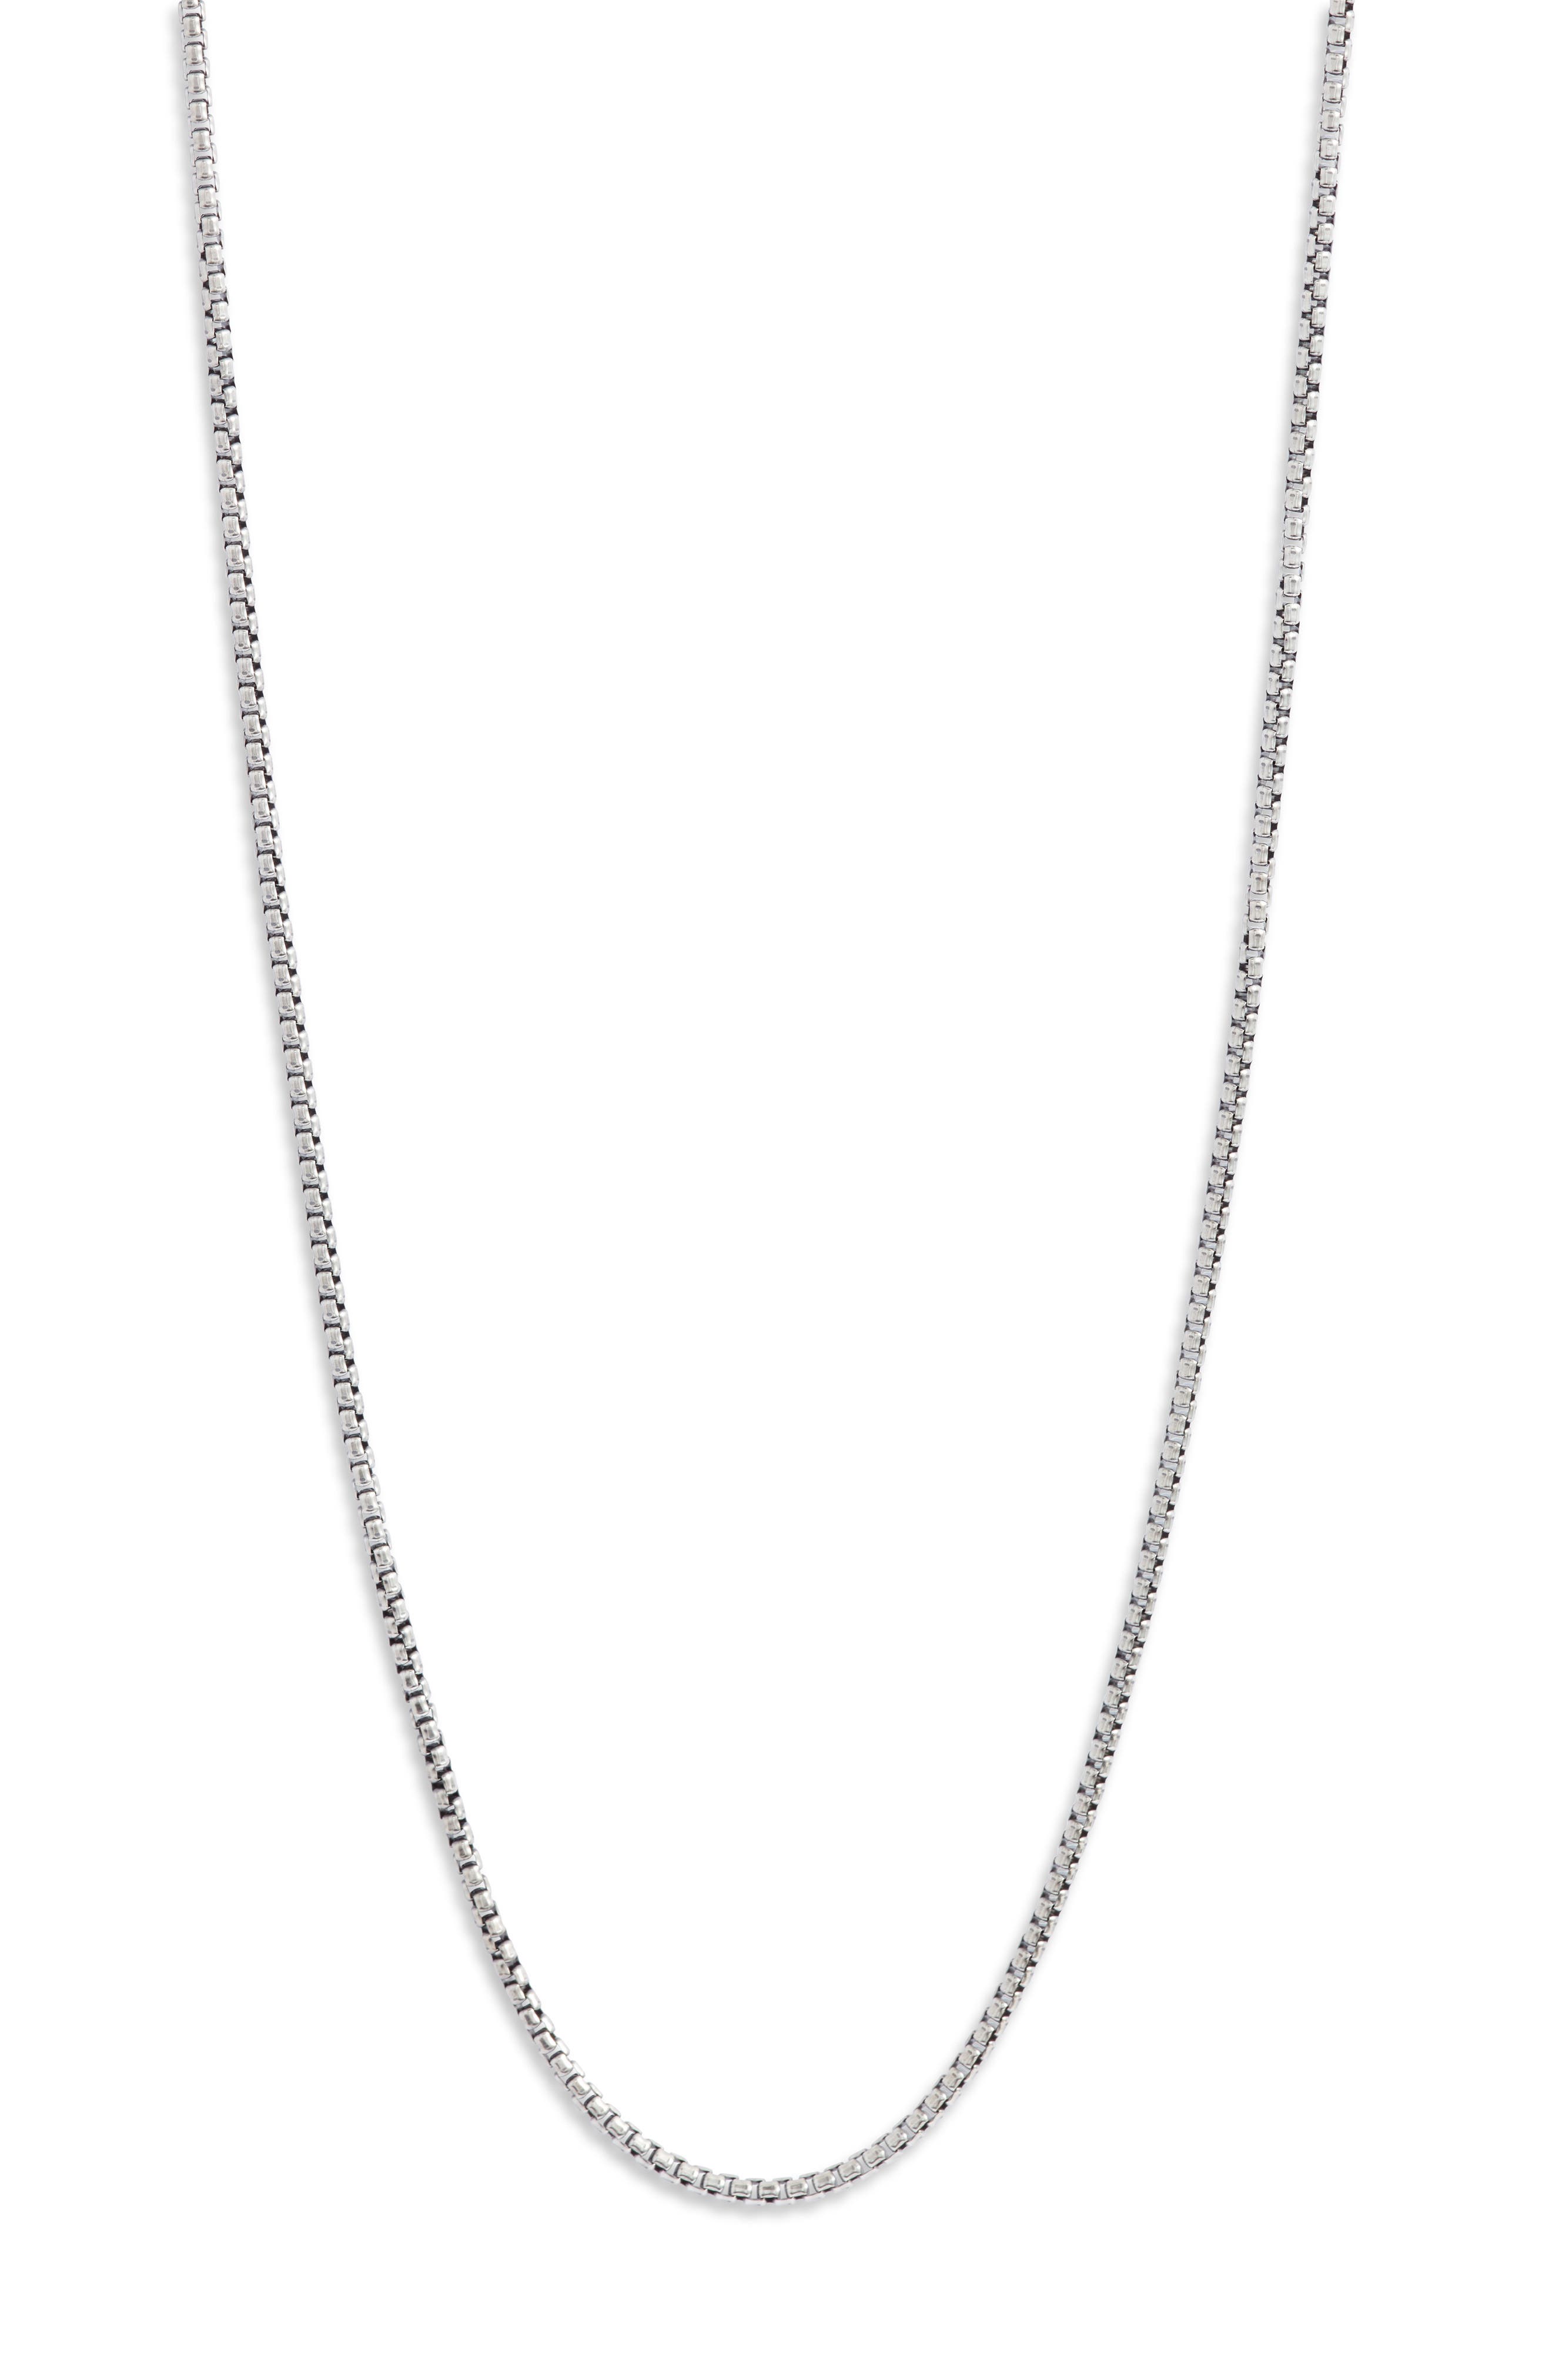 Rope Chain 26 NA BEAUTY White Gold Cross Necklace Pendant Paved with Swaroski Zirconia Paved 